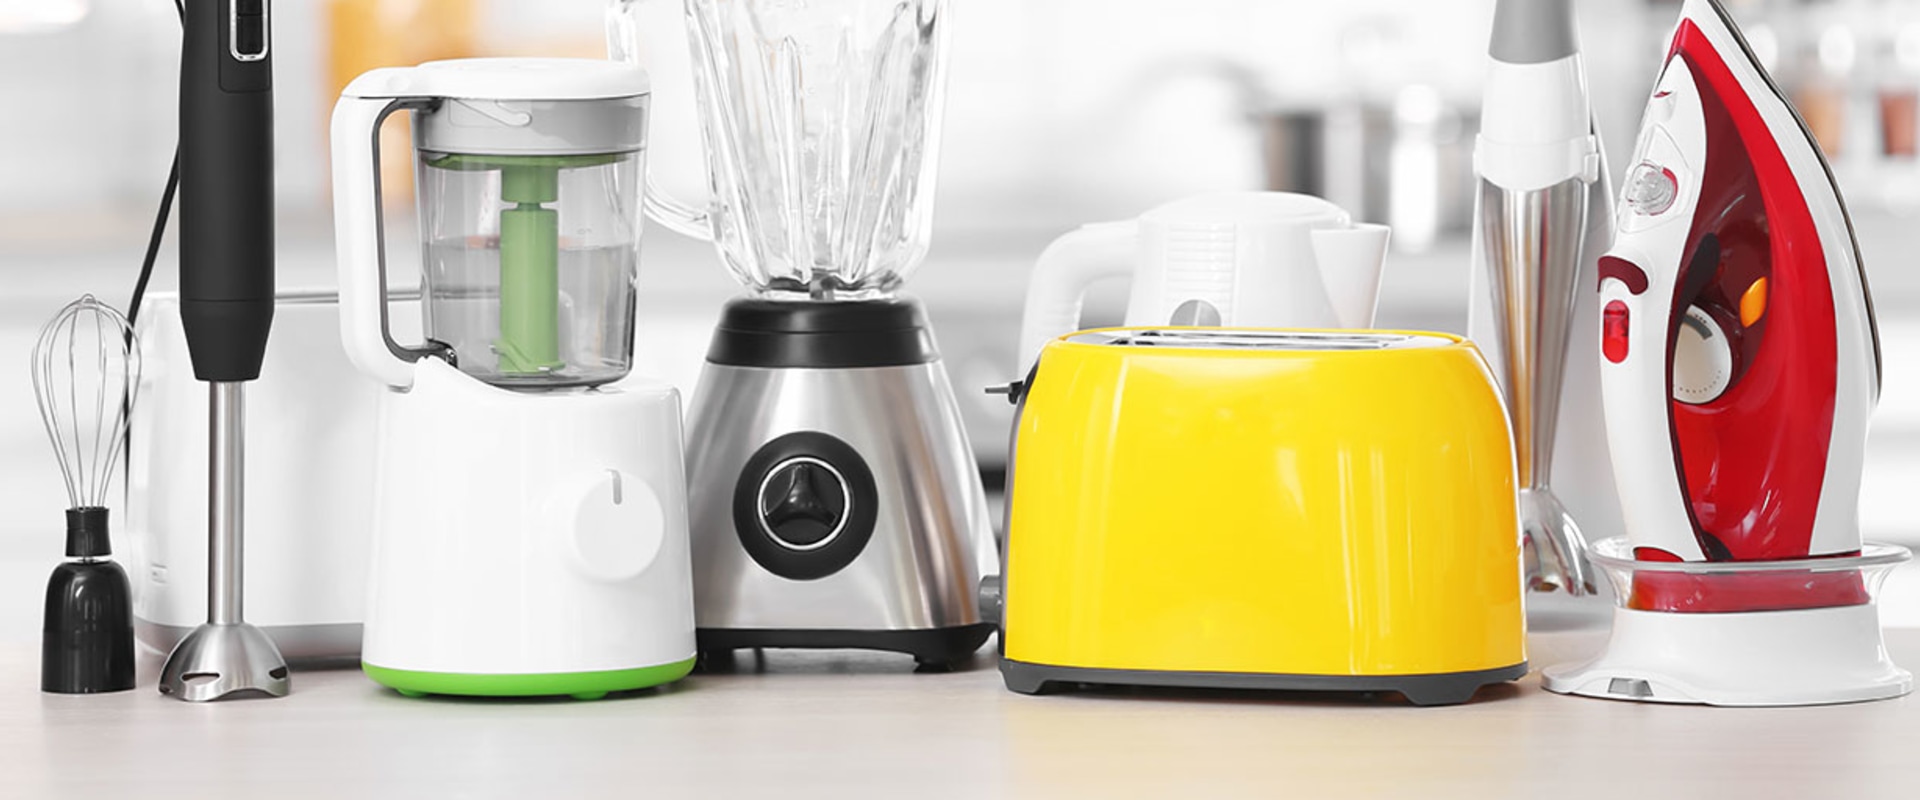 Which is the best home appliances brand?